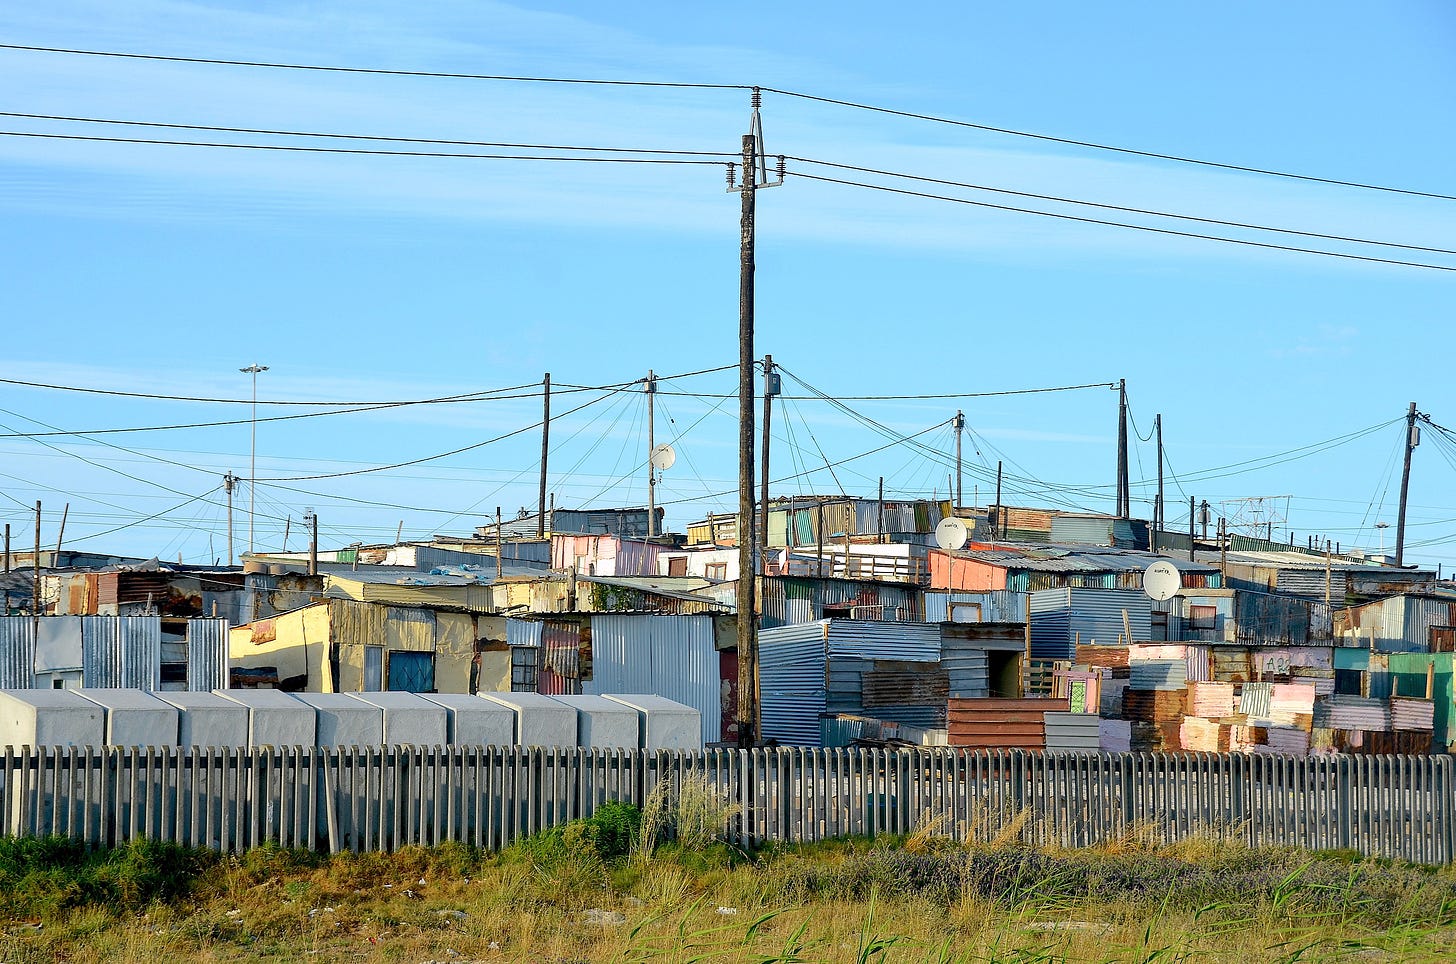 Photograph of shacks made out of corrugated metal and wood